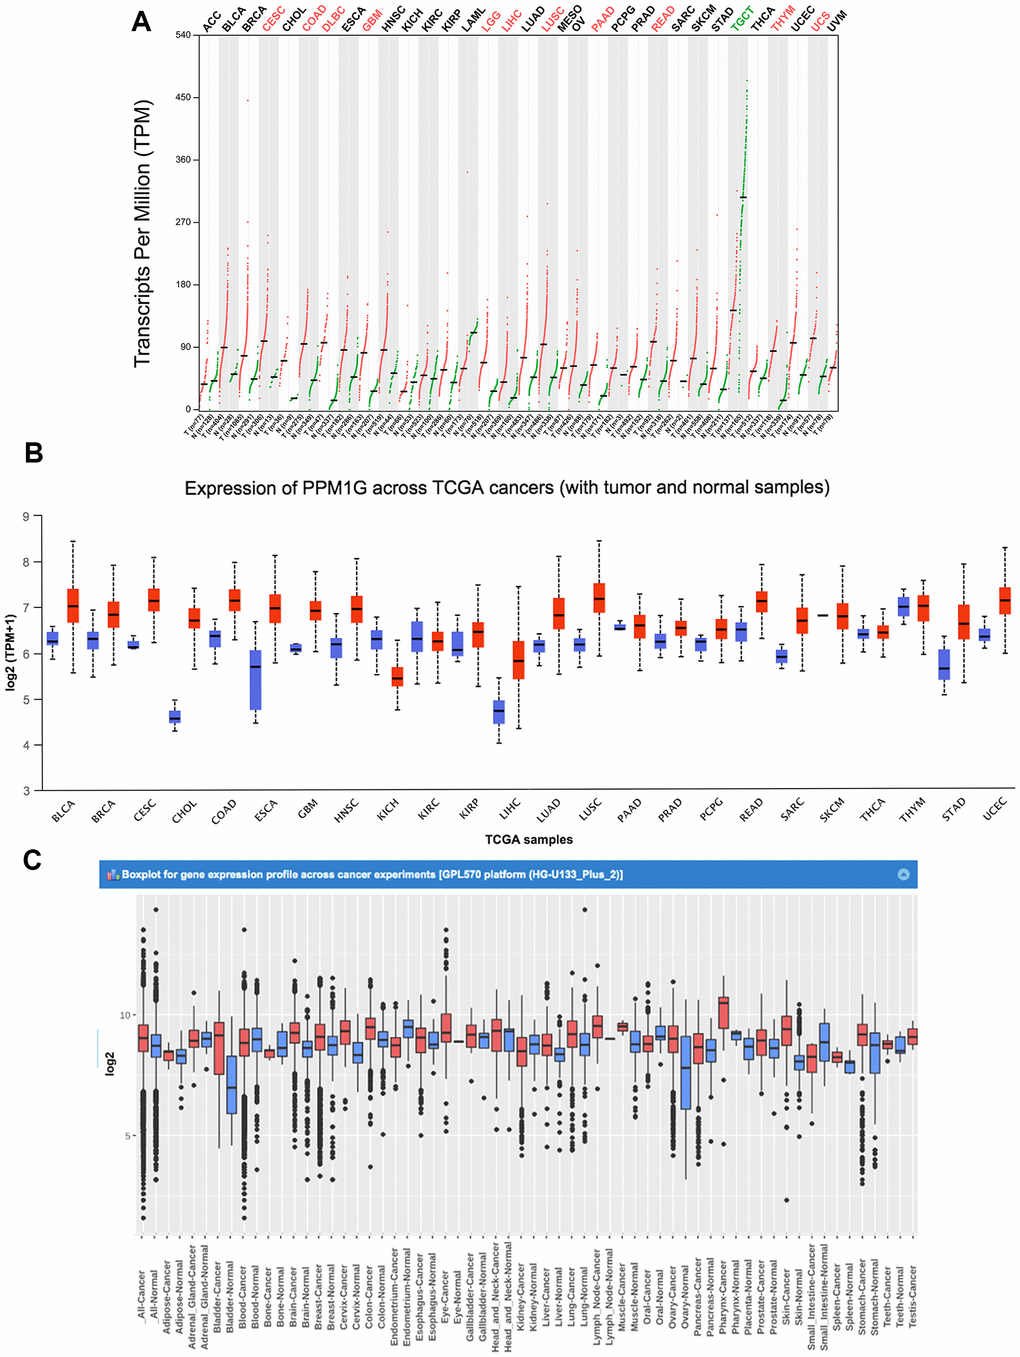 PPM1G mRNA expression in various types of cancer. (A) The expression of PPM1G in 33 types of human cancer (GEPIA). The gene expression profiles across all tumor samples and paired normal tissues are shown in a dot plot, and each dot represents the expression profile in one sample. (B) PPM1G expression in 24 types of cancers (UALCAN). The box plot shows the gene expression levels in different cancers and normal tissues as the interquartile range (IQR), including the minimum, 25th percentile, median, 75th percentile and maximum values. Red boxes represent tumor tissues, and green boxes represent normal tissues. (C) Data concerning PPM1G mRNA expression in various types of cancer (GENT). The boxes represent the median and the 25th and 75th percentiles. The dots represent outliers. The red boxes represent tumor tissues, and the green boxes represent normal tissues.